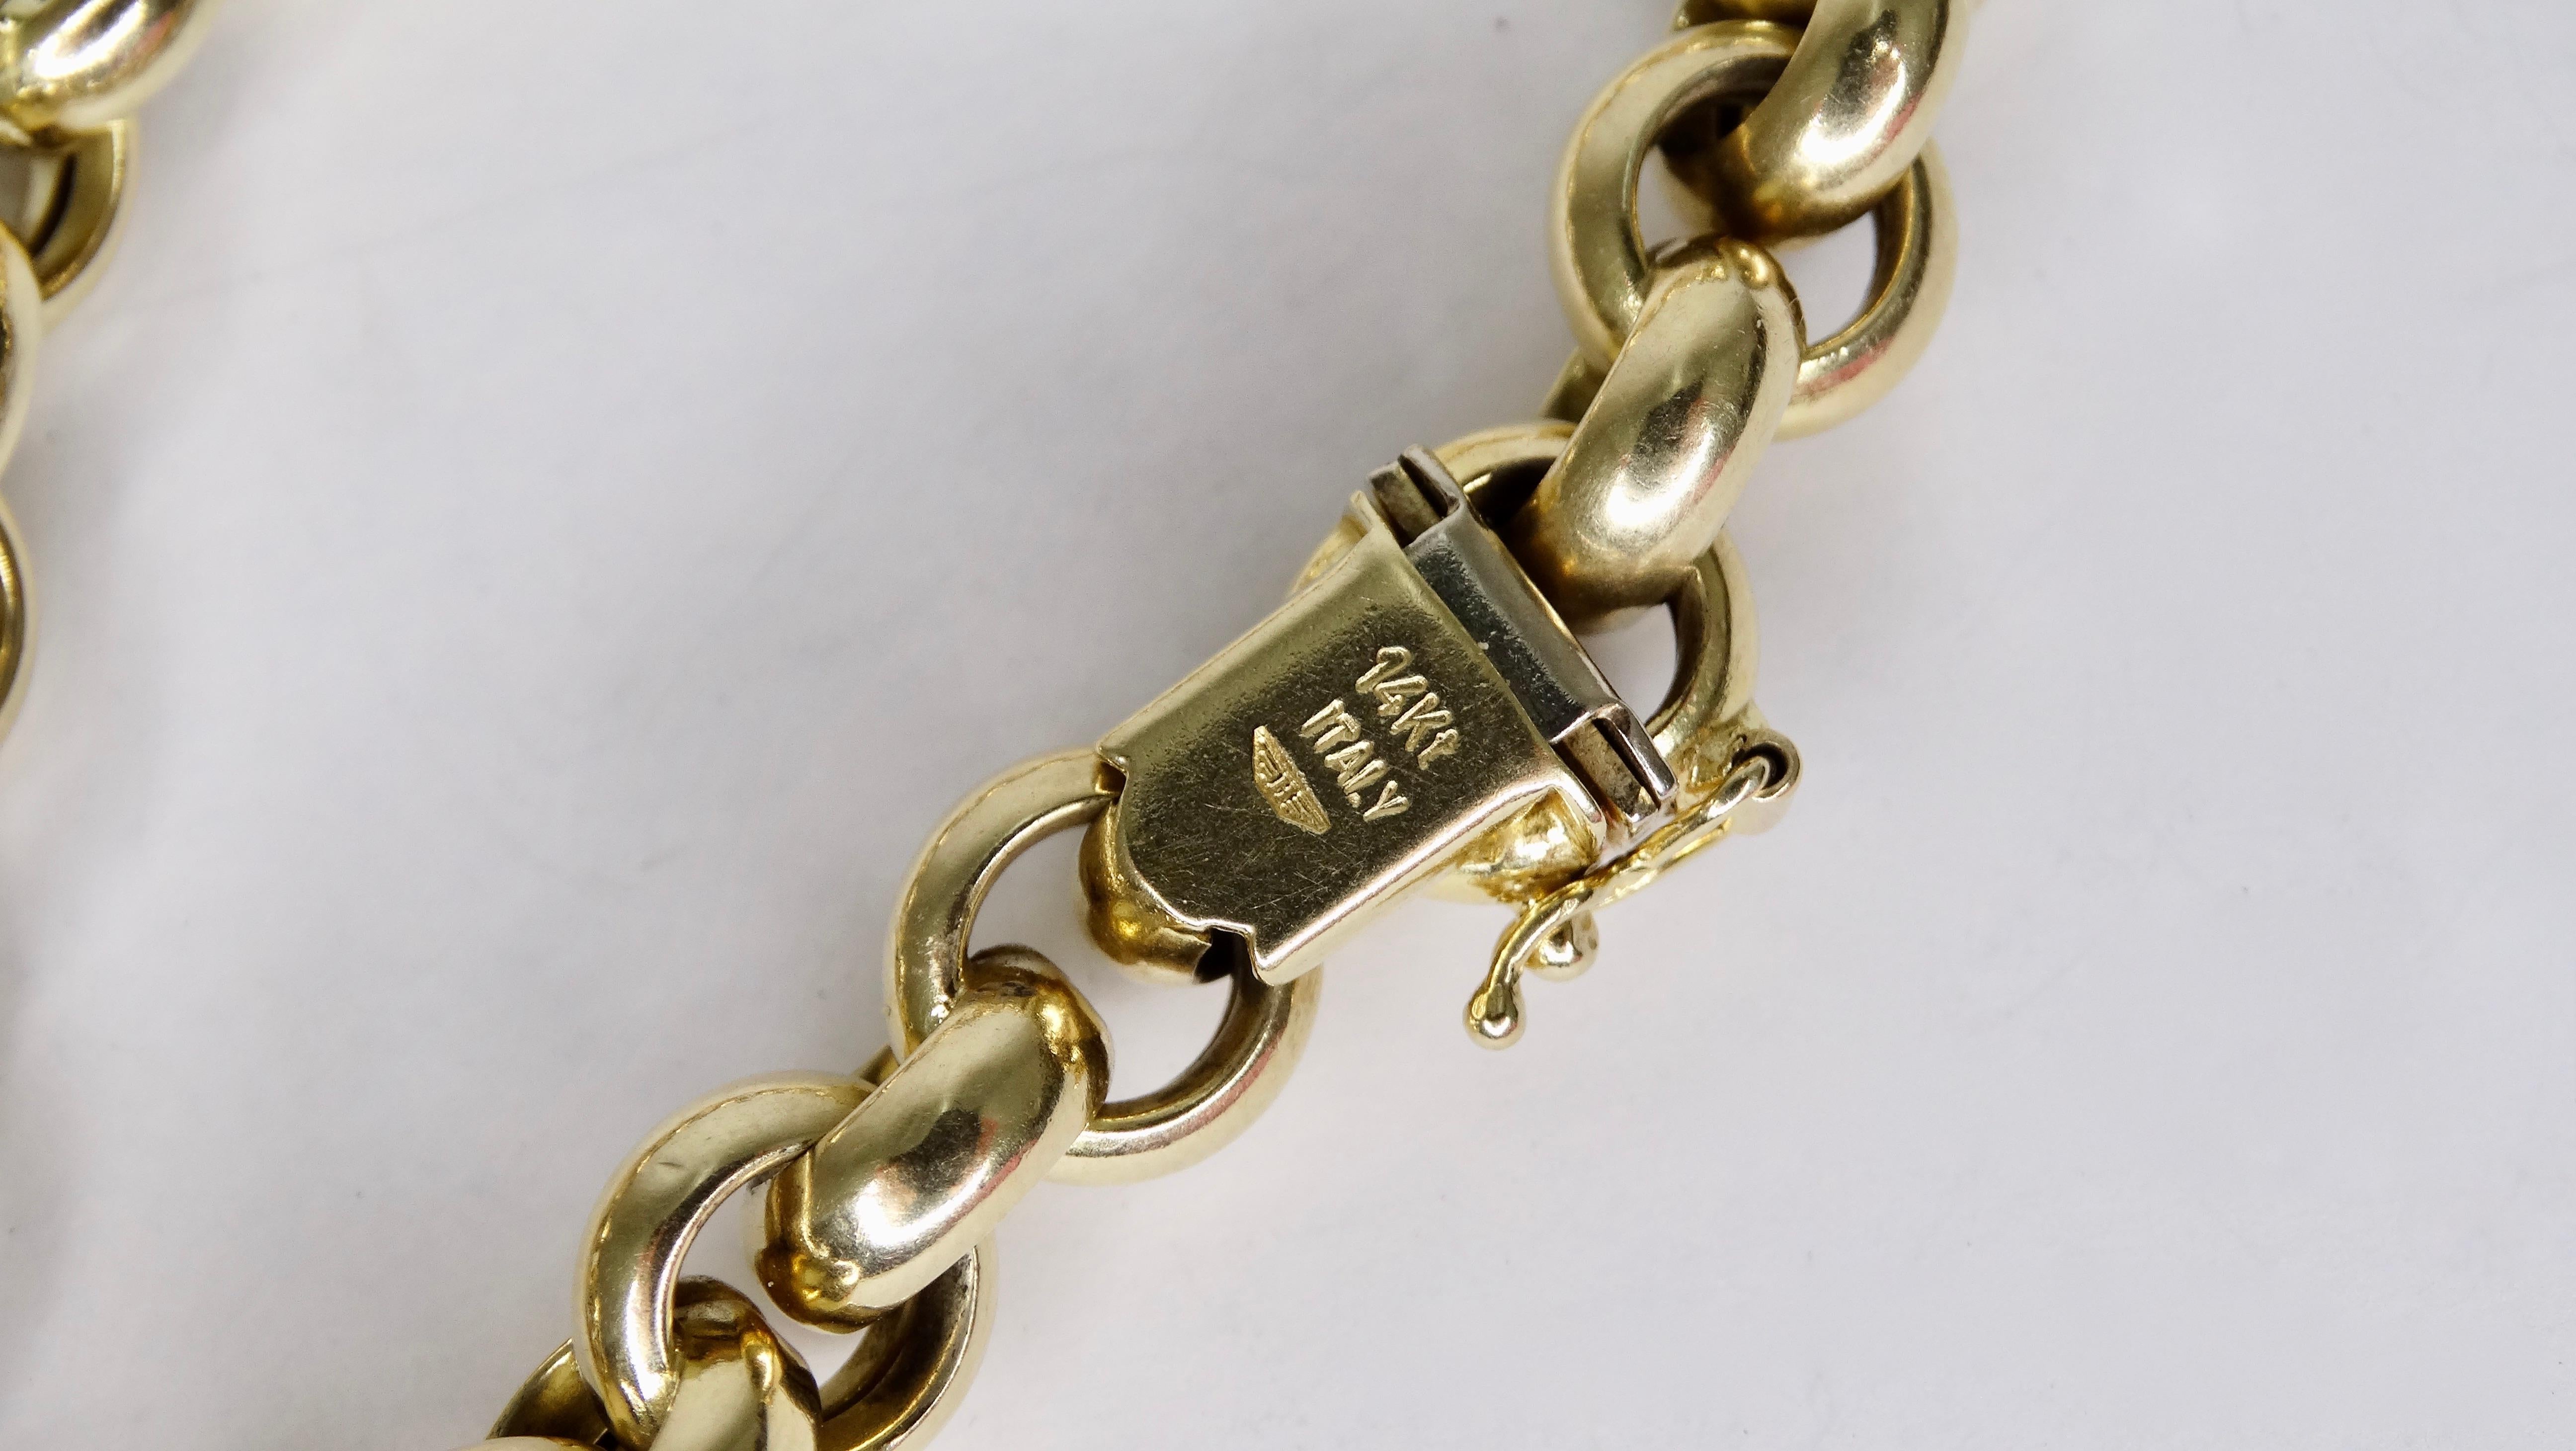 Add this late 20th century 14k Gold chain link bracelet to your stack. Tab closure stamped Italy 14k. 
Total weight is 18g. Perfect to pair with your favorite Cartier watch or Hermes bracelets! 6-7